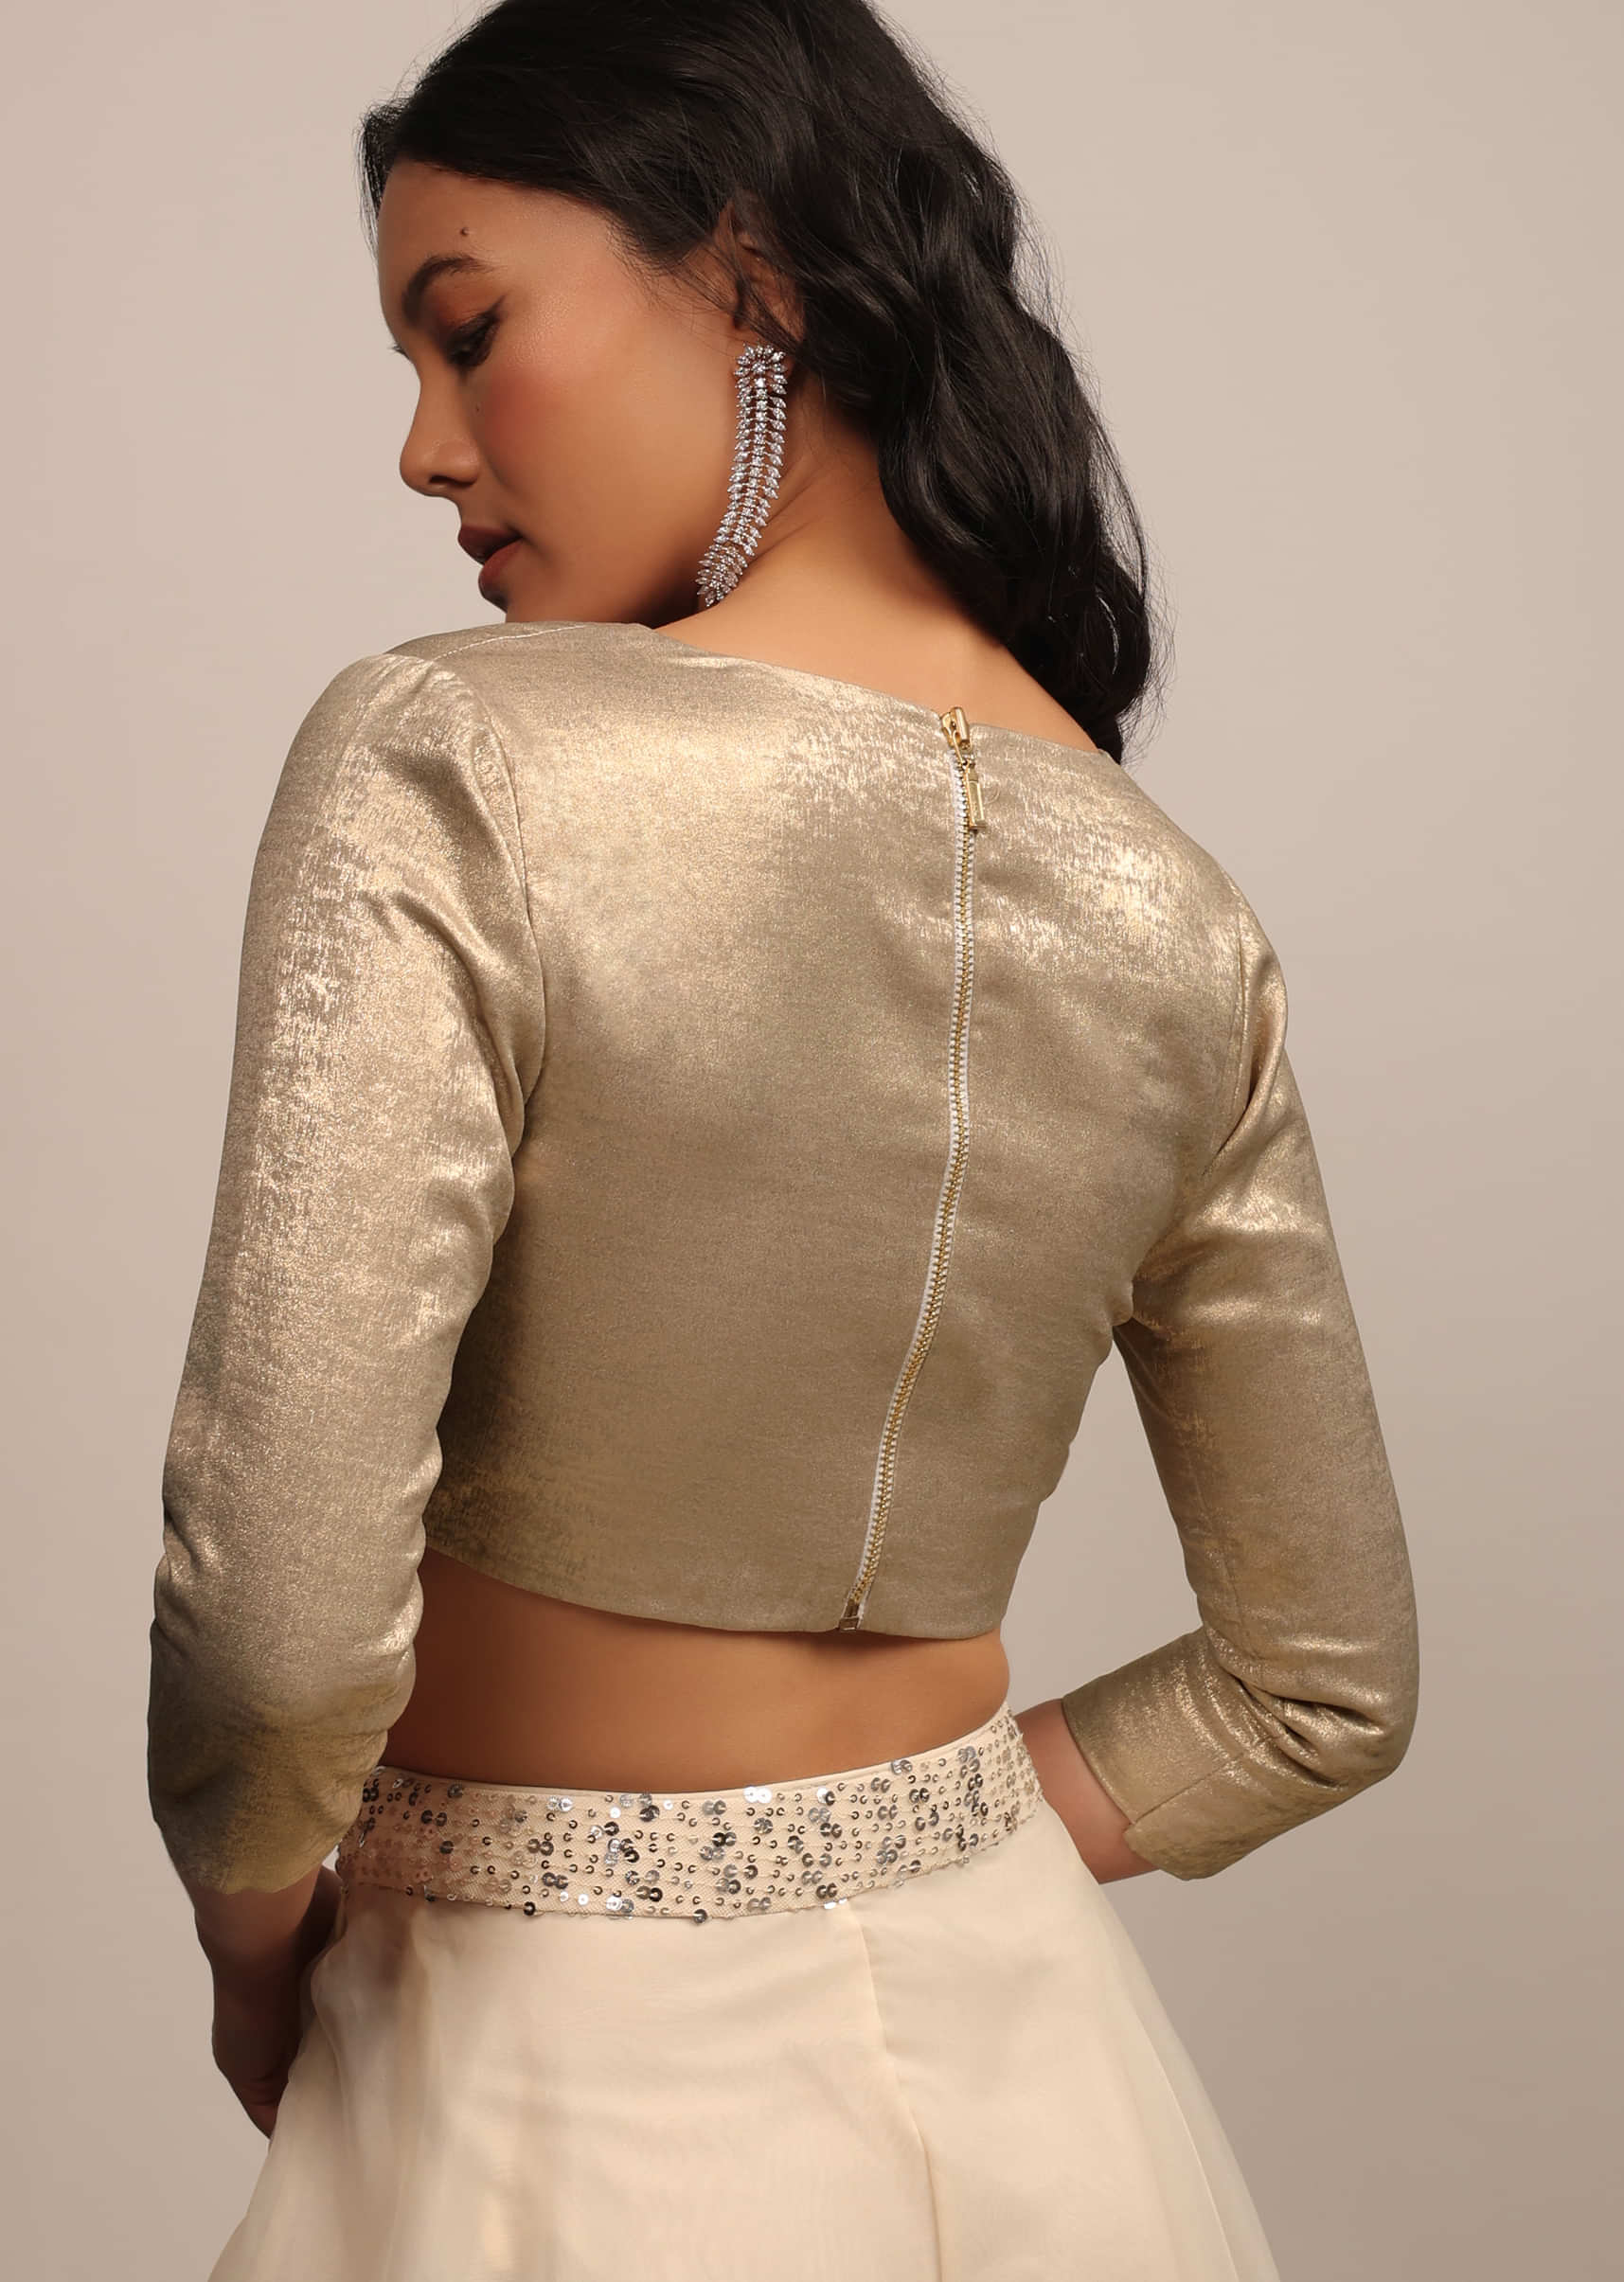 Dusty Golden Blouse In Satin With Plunging V Neckline